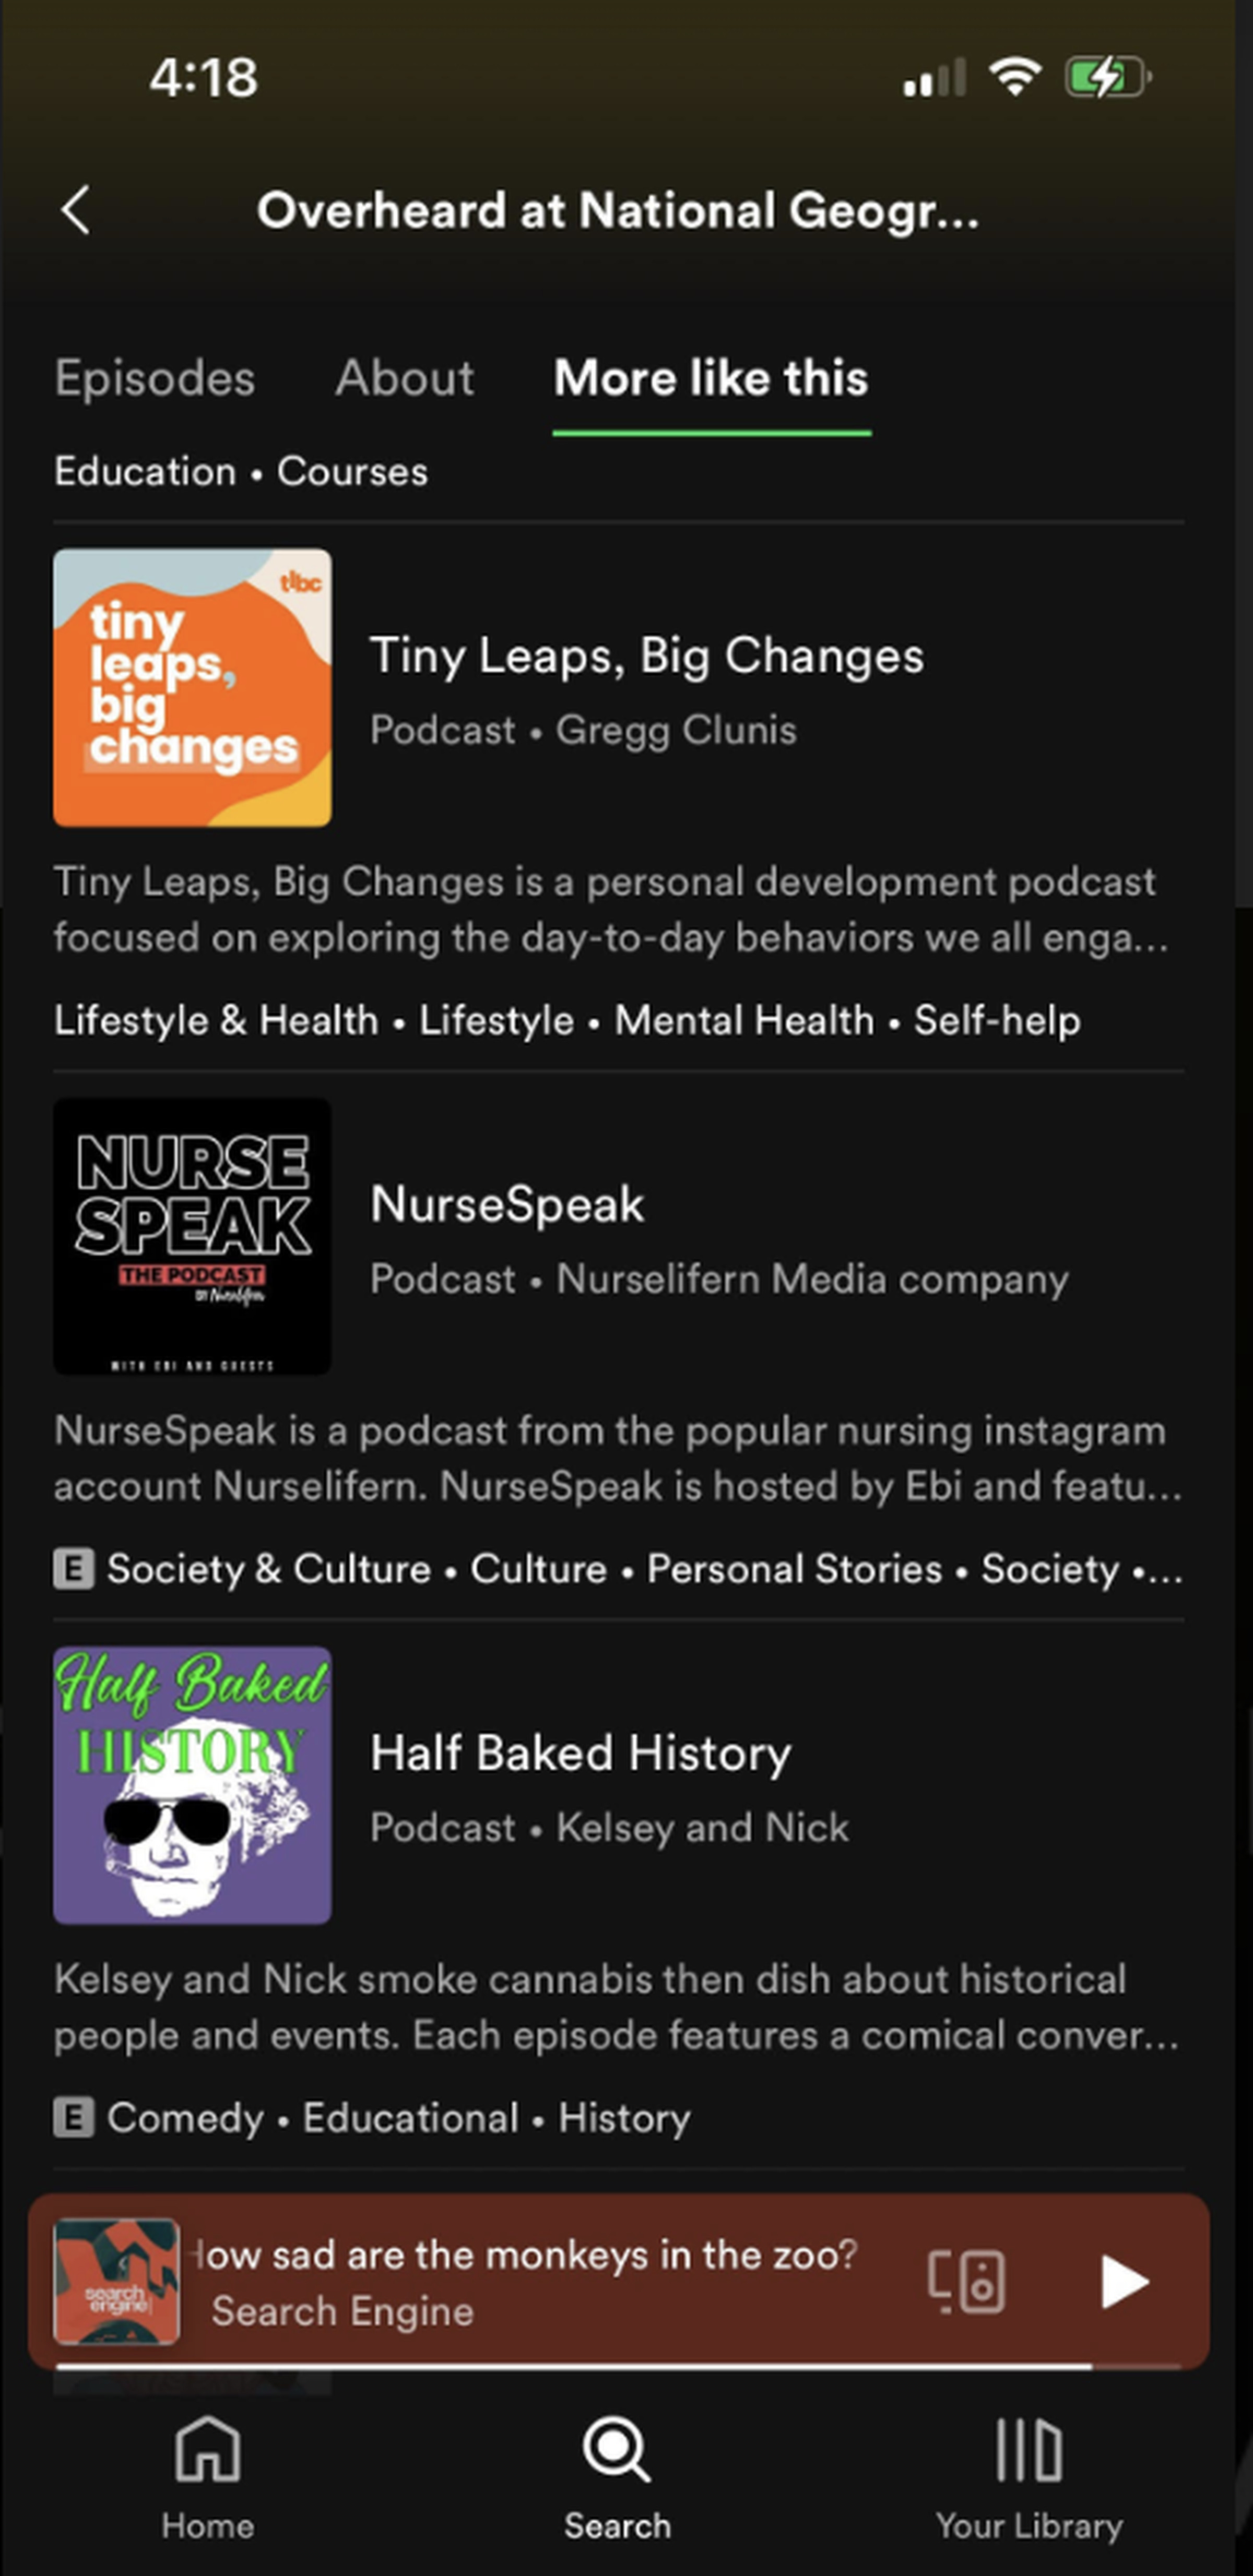 Recommended podcasts for listeners of “Overheard at National Geographic”. 